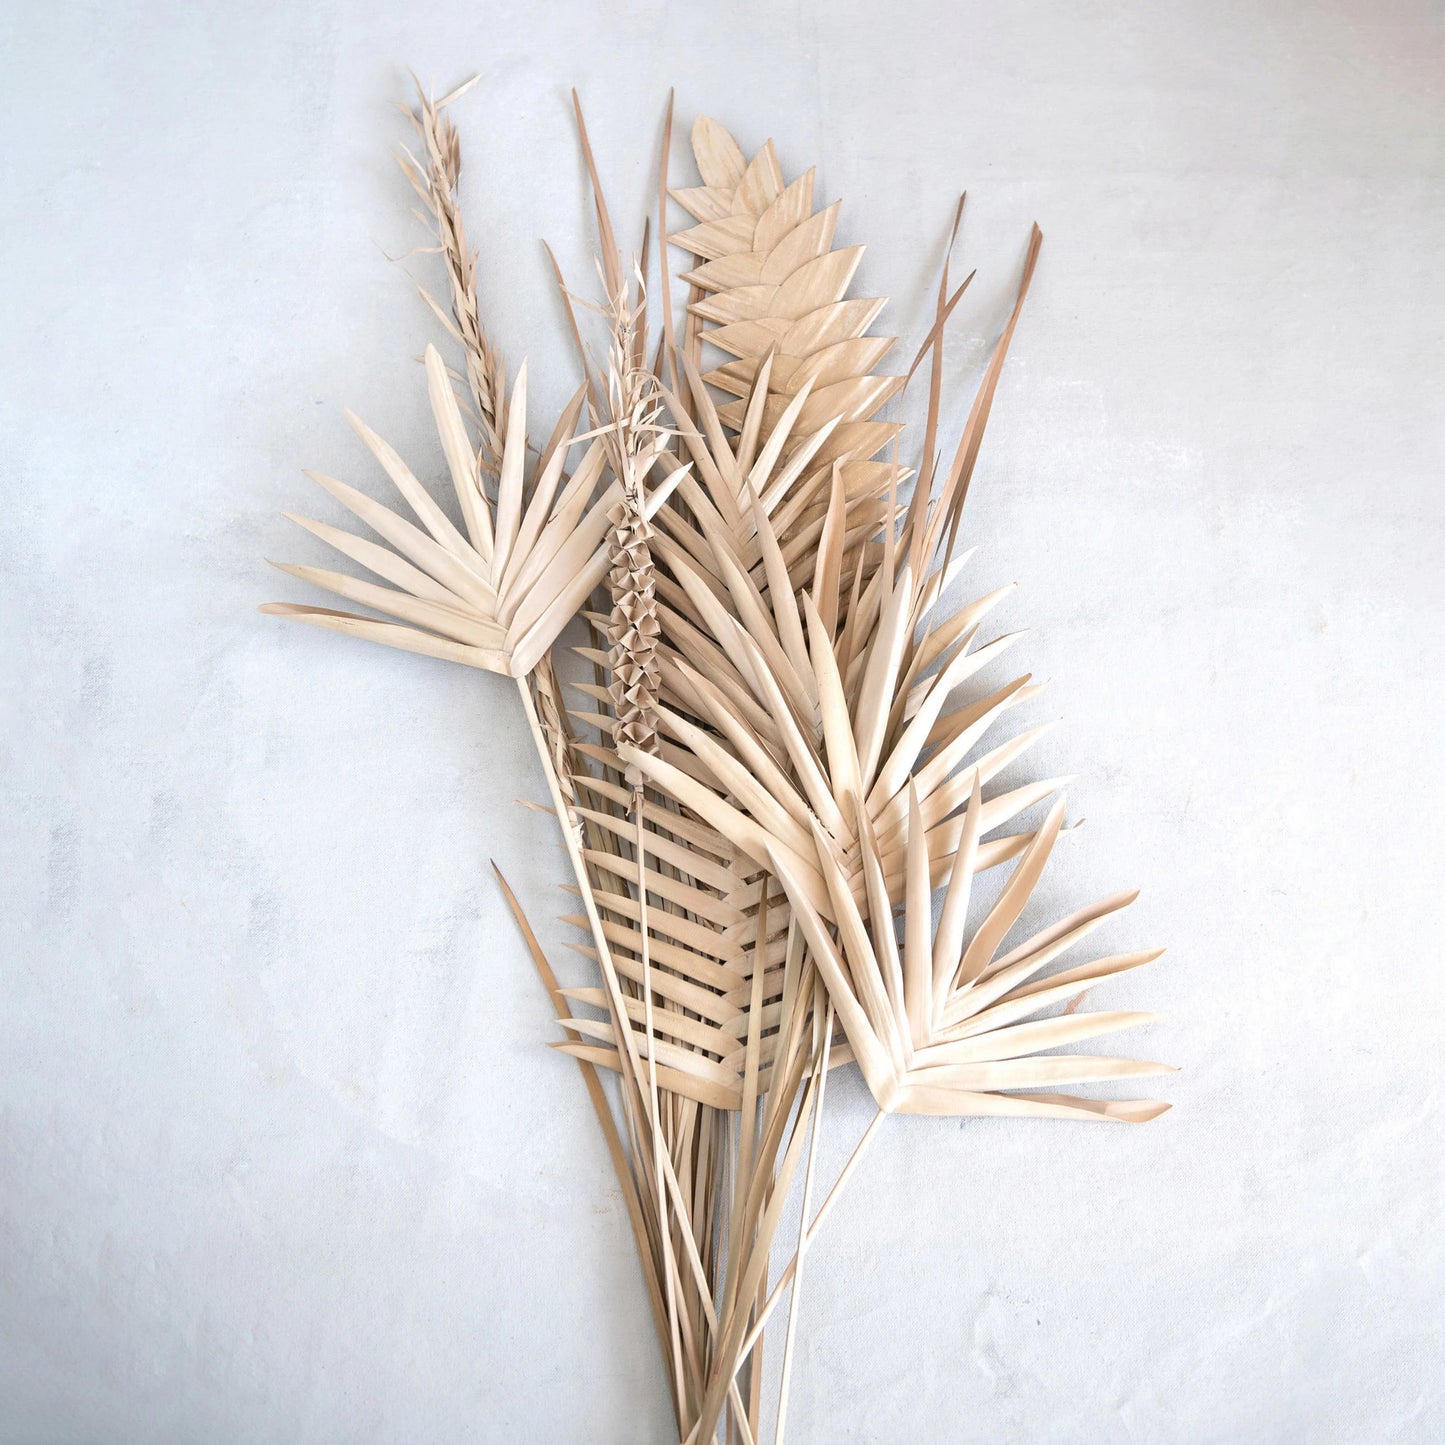 assorted palm leaves arranged on a light grey background.